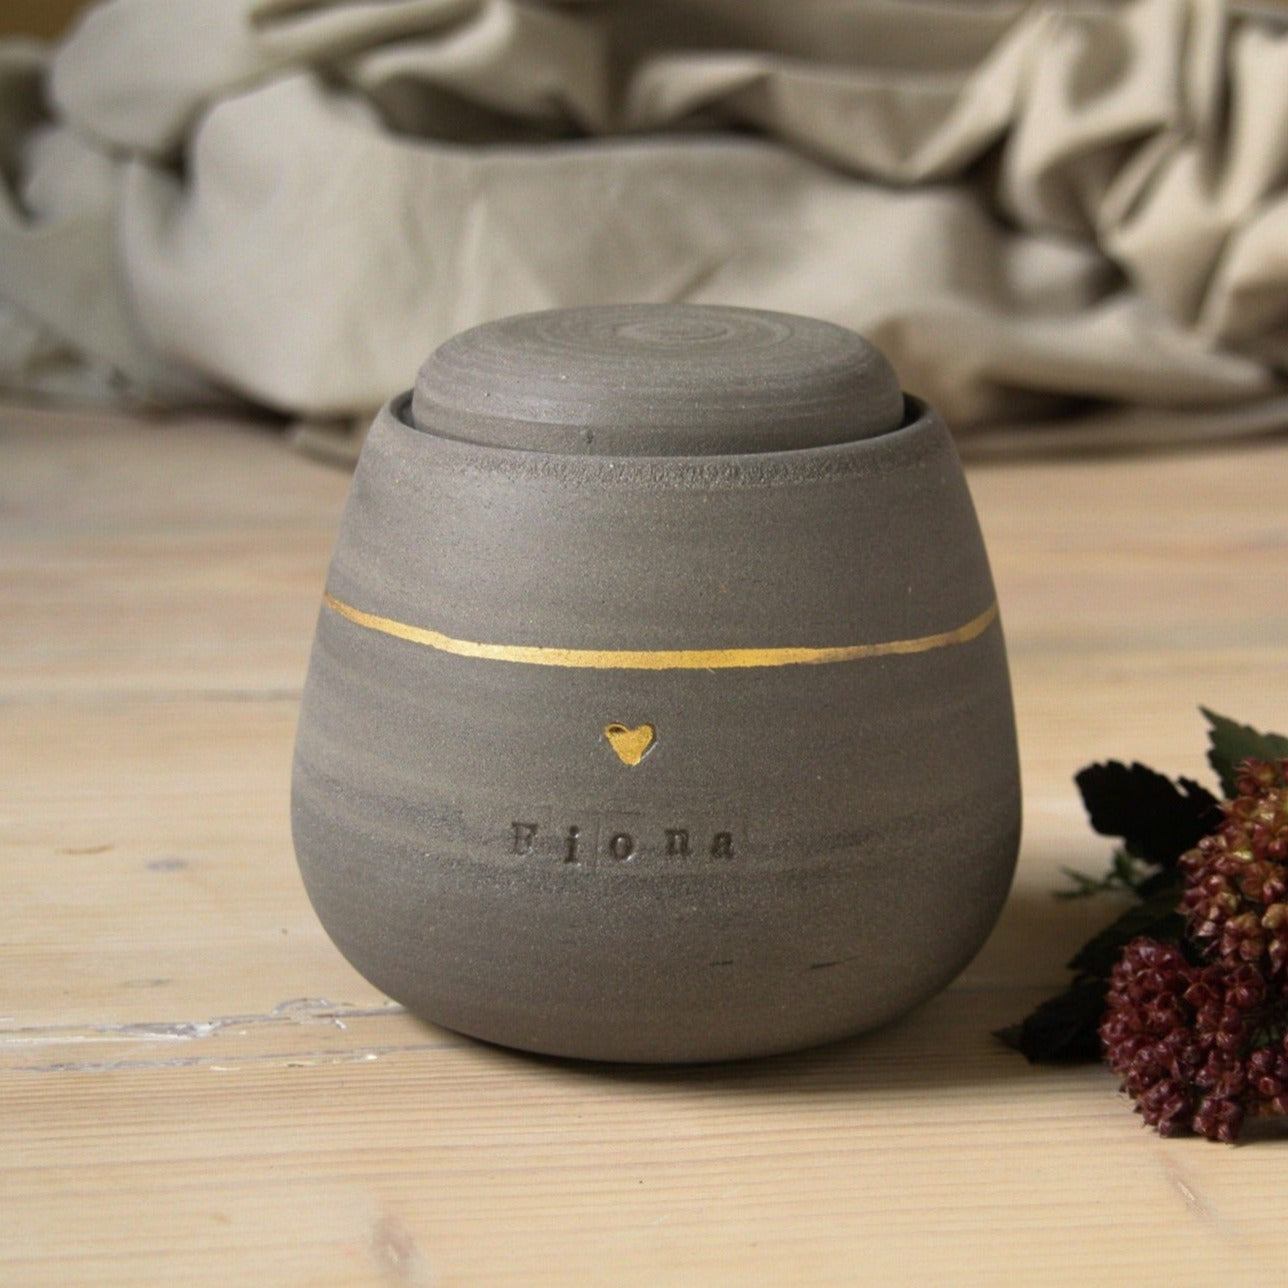 Handcrafted Pet Cremation Urn - Gray Stoneware - Gold Paw Stamp - Engraved with "Fiona"